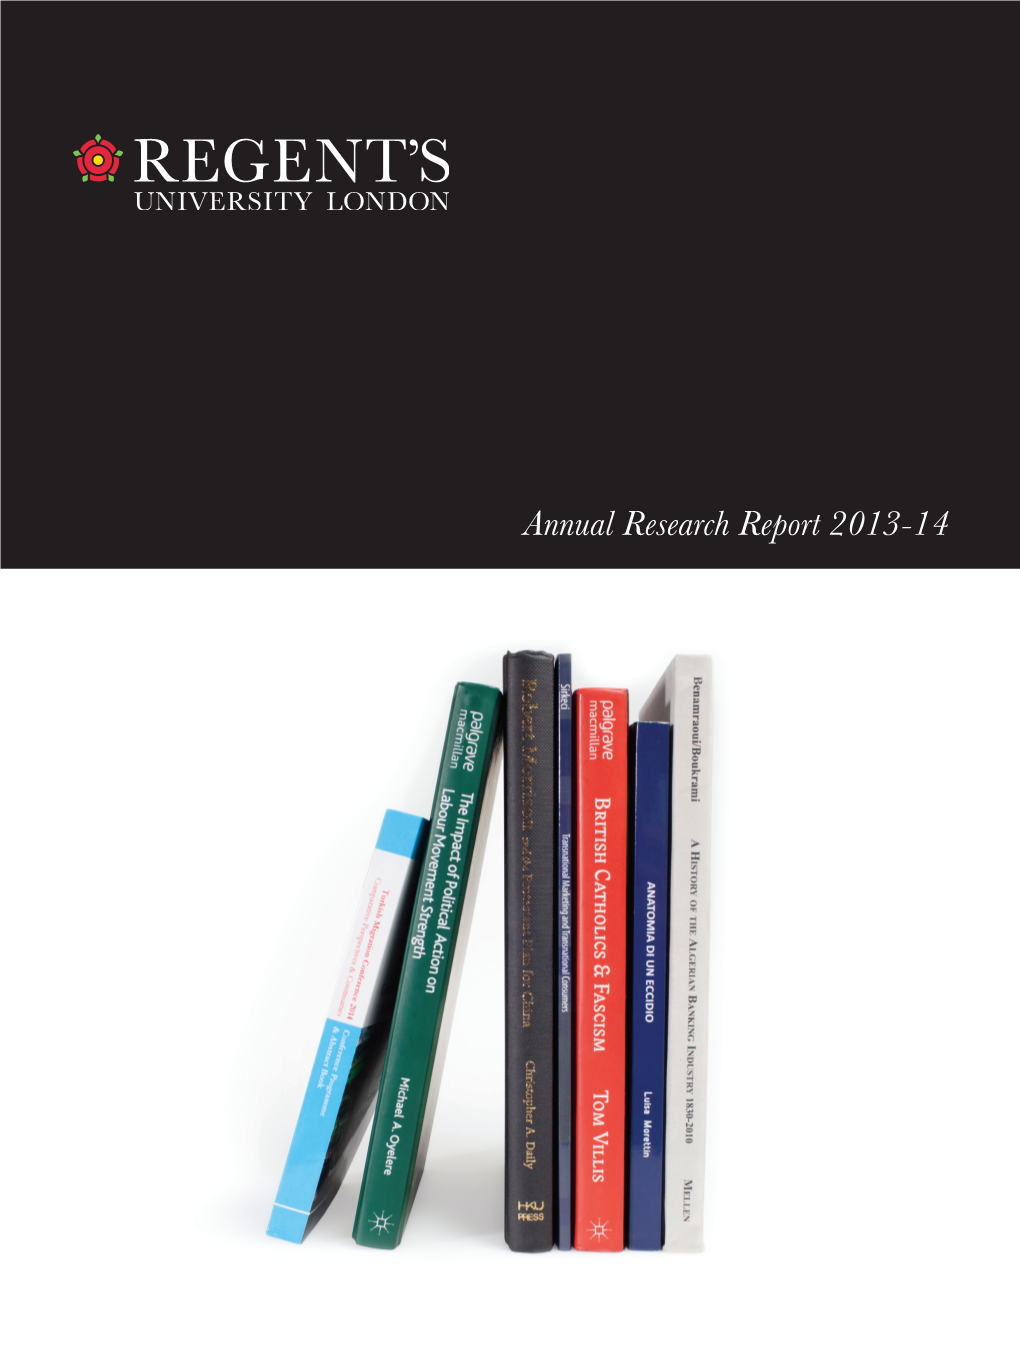 Annual Research Report 2013-14